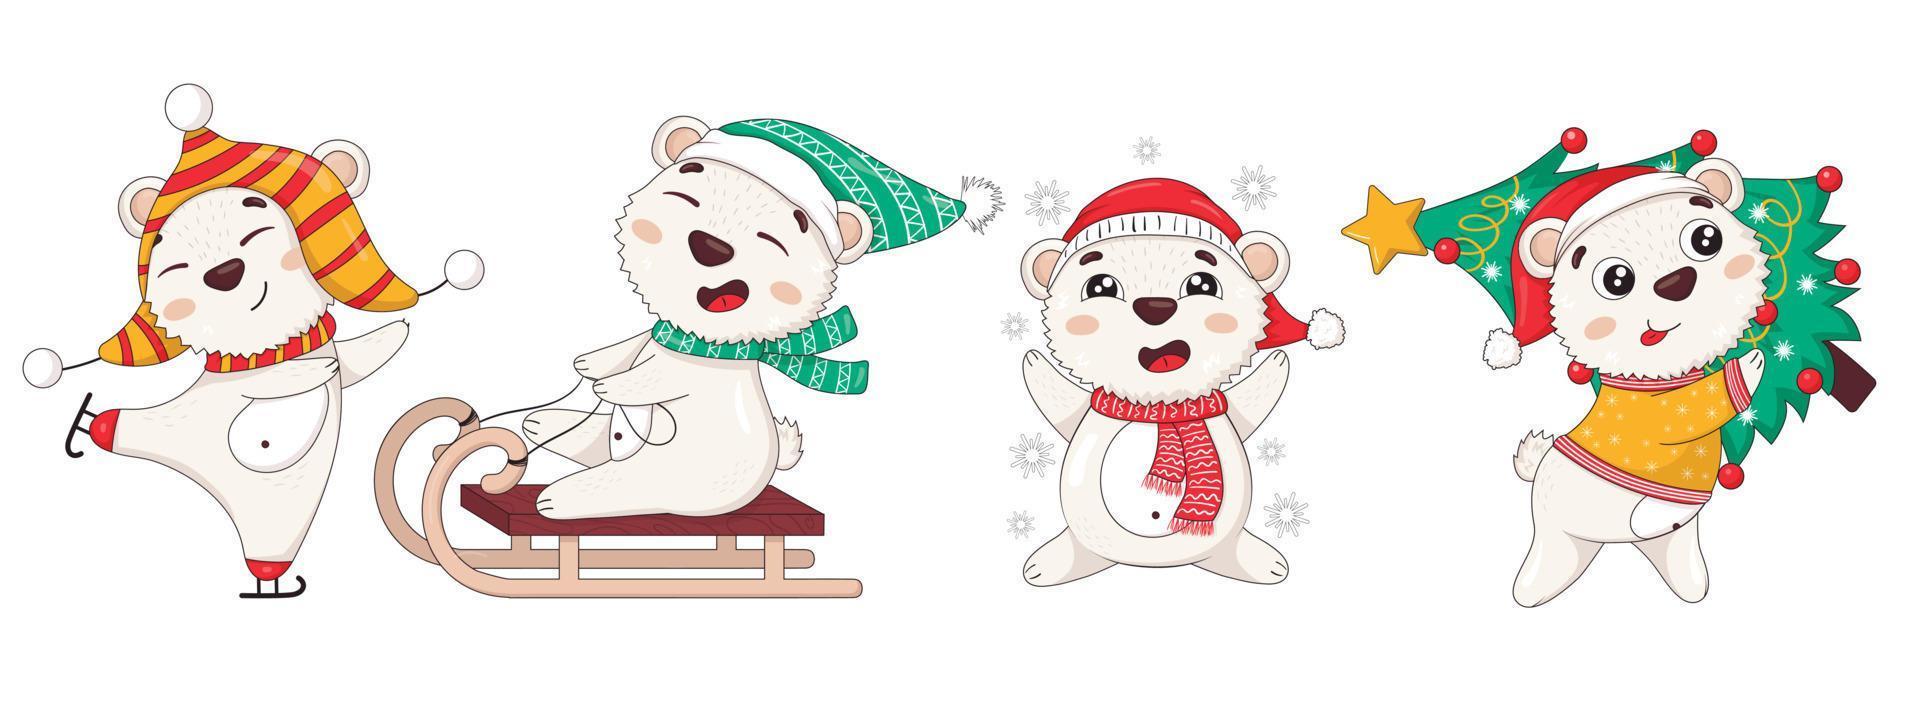 Collection of cute cartoon new year polar bears in winter clothes with christmas tree, skating, sledding, catching snowflakes vector